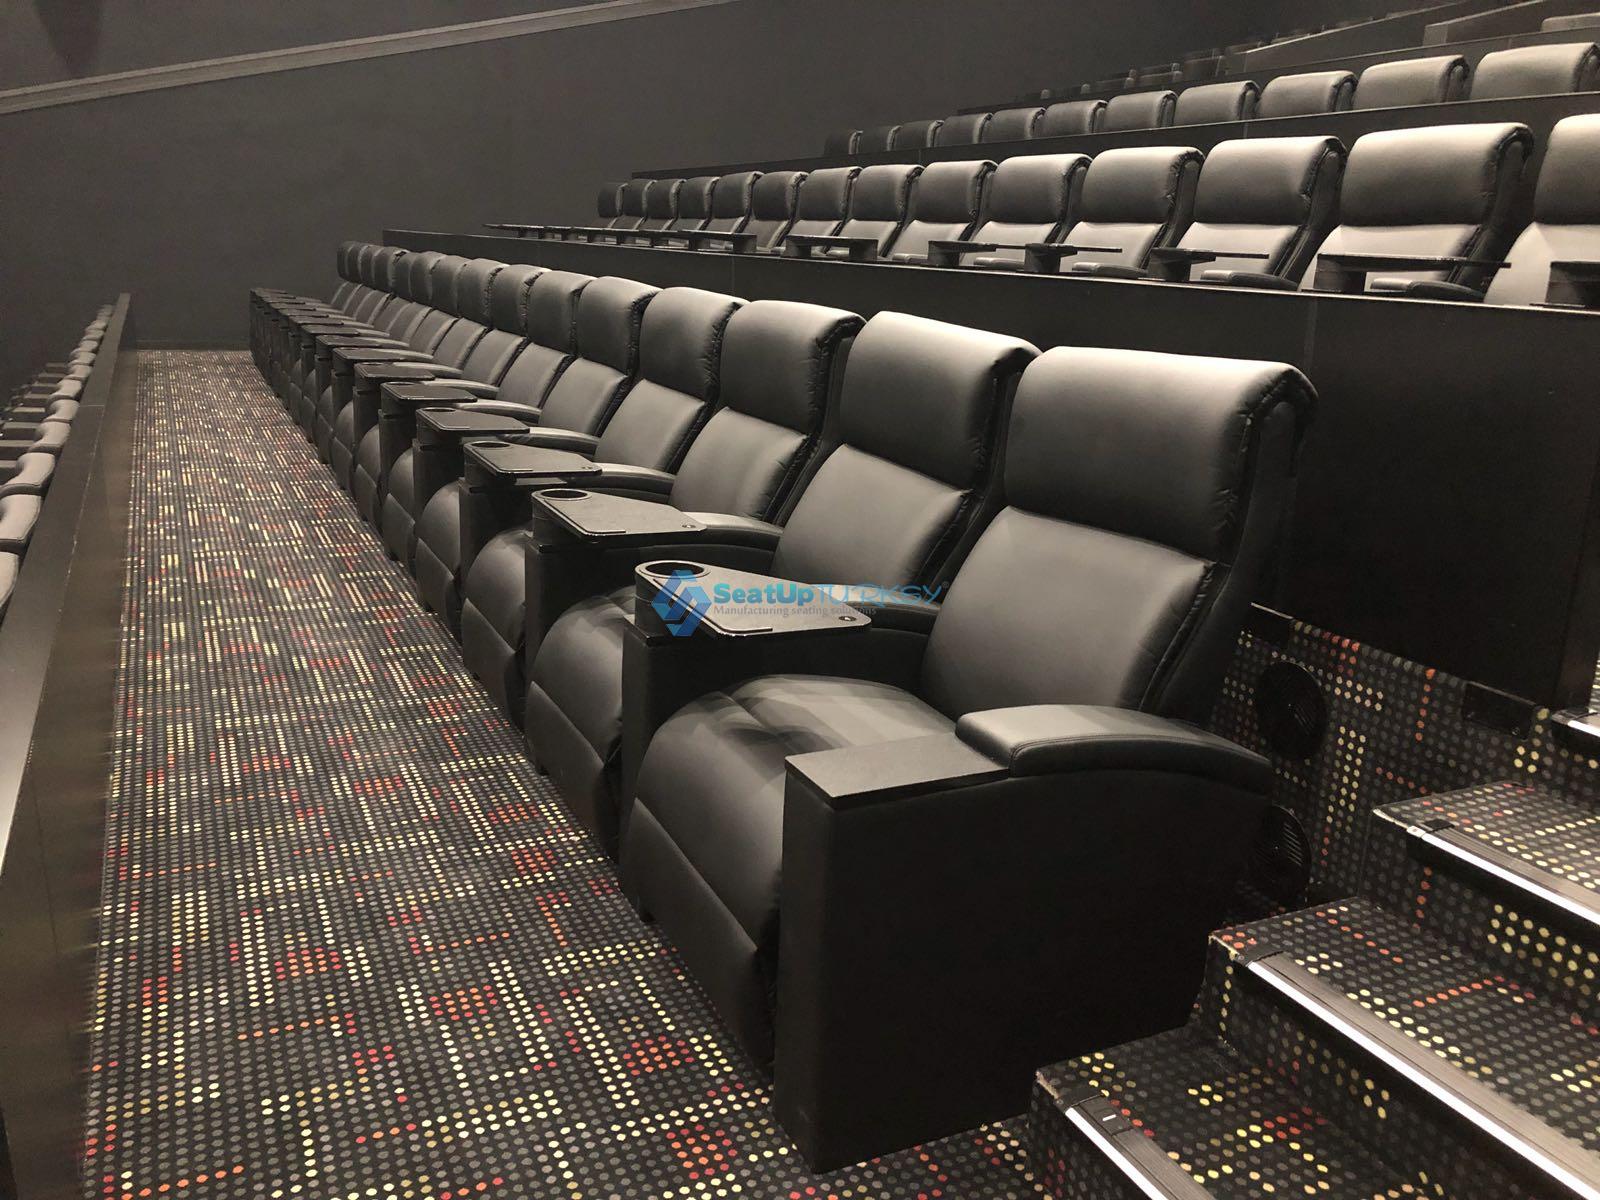 High quality Cinema seating are the key to the success of your business